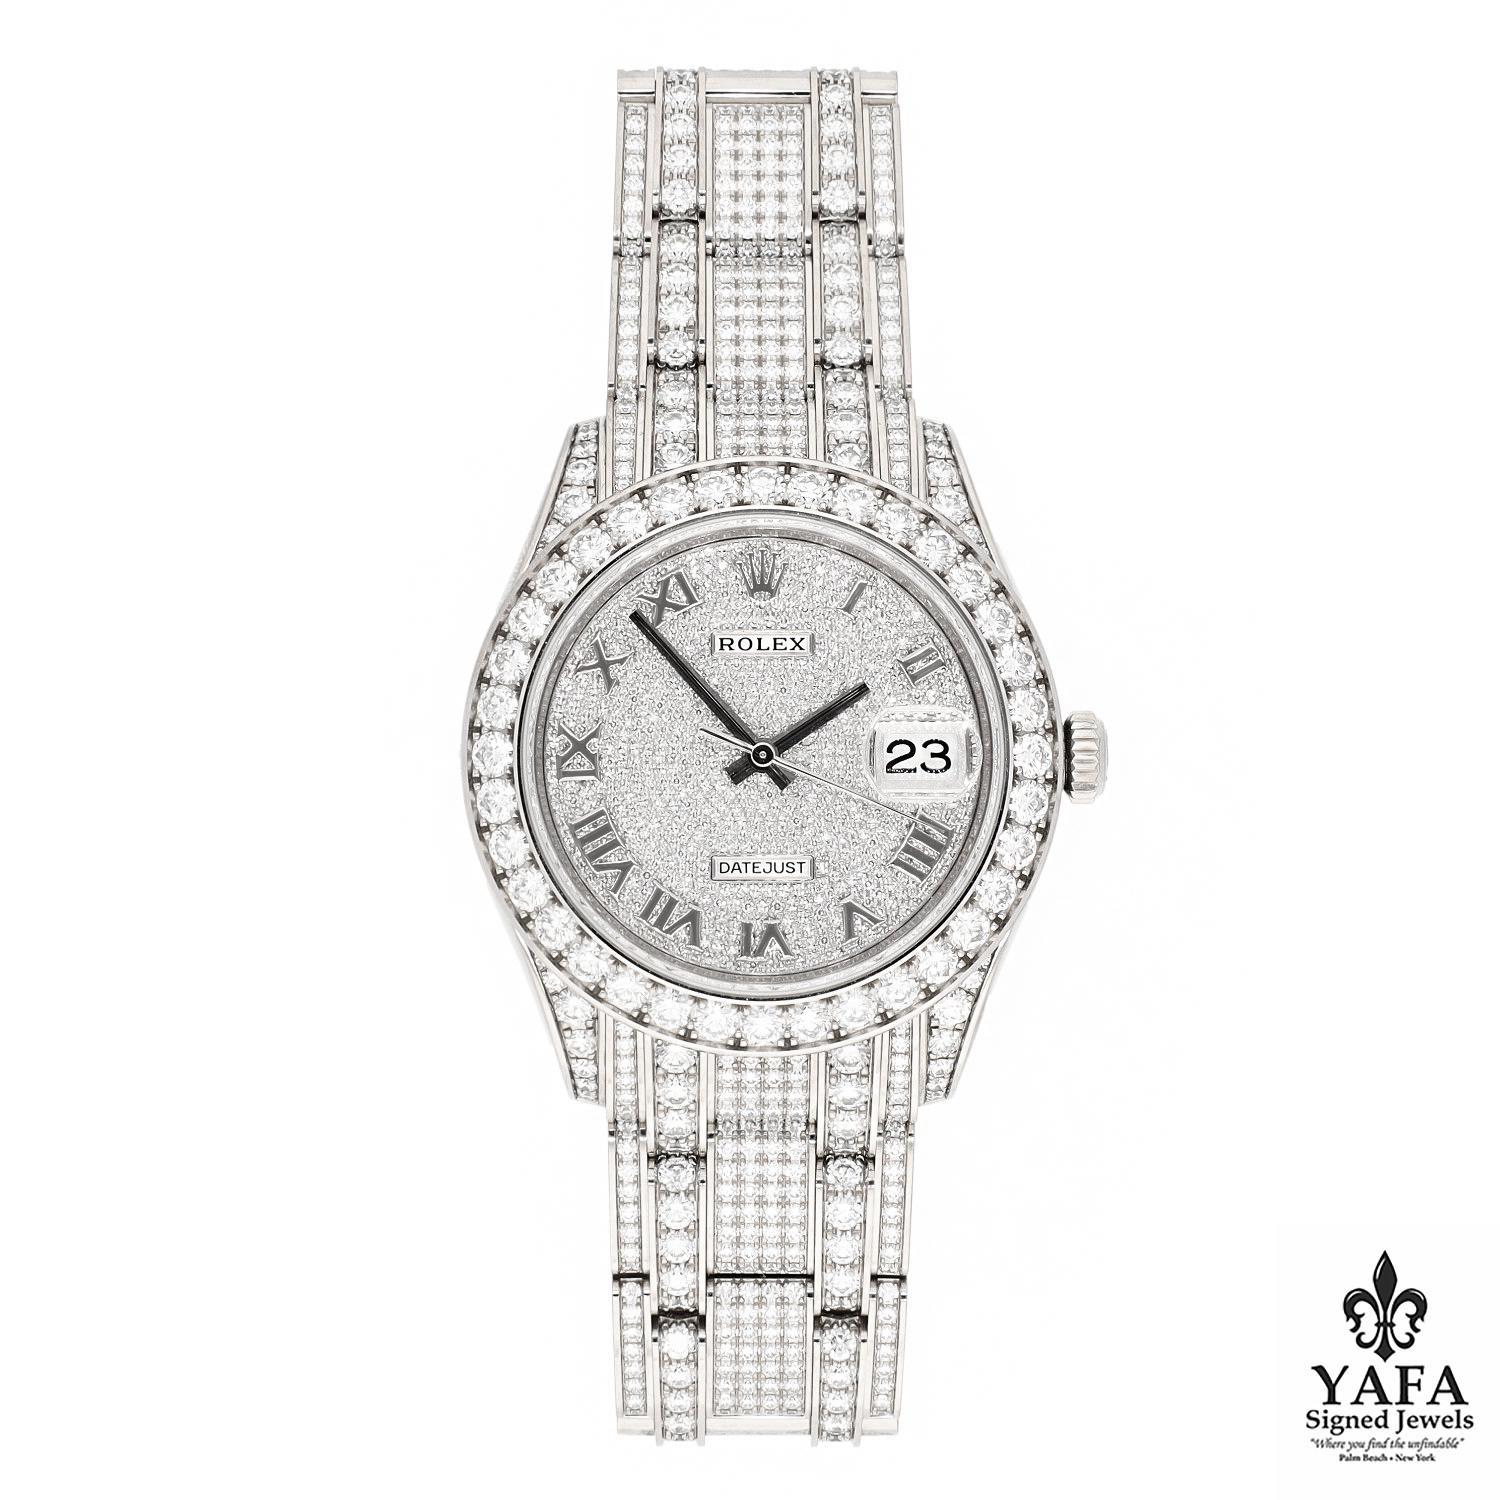 18K White Gold Case with a 18K White Gold Diamond Pearlmaster Bracelet. Fixed 18K White Gold Diamond Bezel. Diamond Pave Dial with Roman Numeral Hour Markers. Dial Type: Analog. Date Display at 3 O'clock Position. Rolex Calibre 3235 Automatic